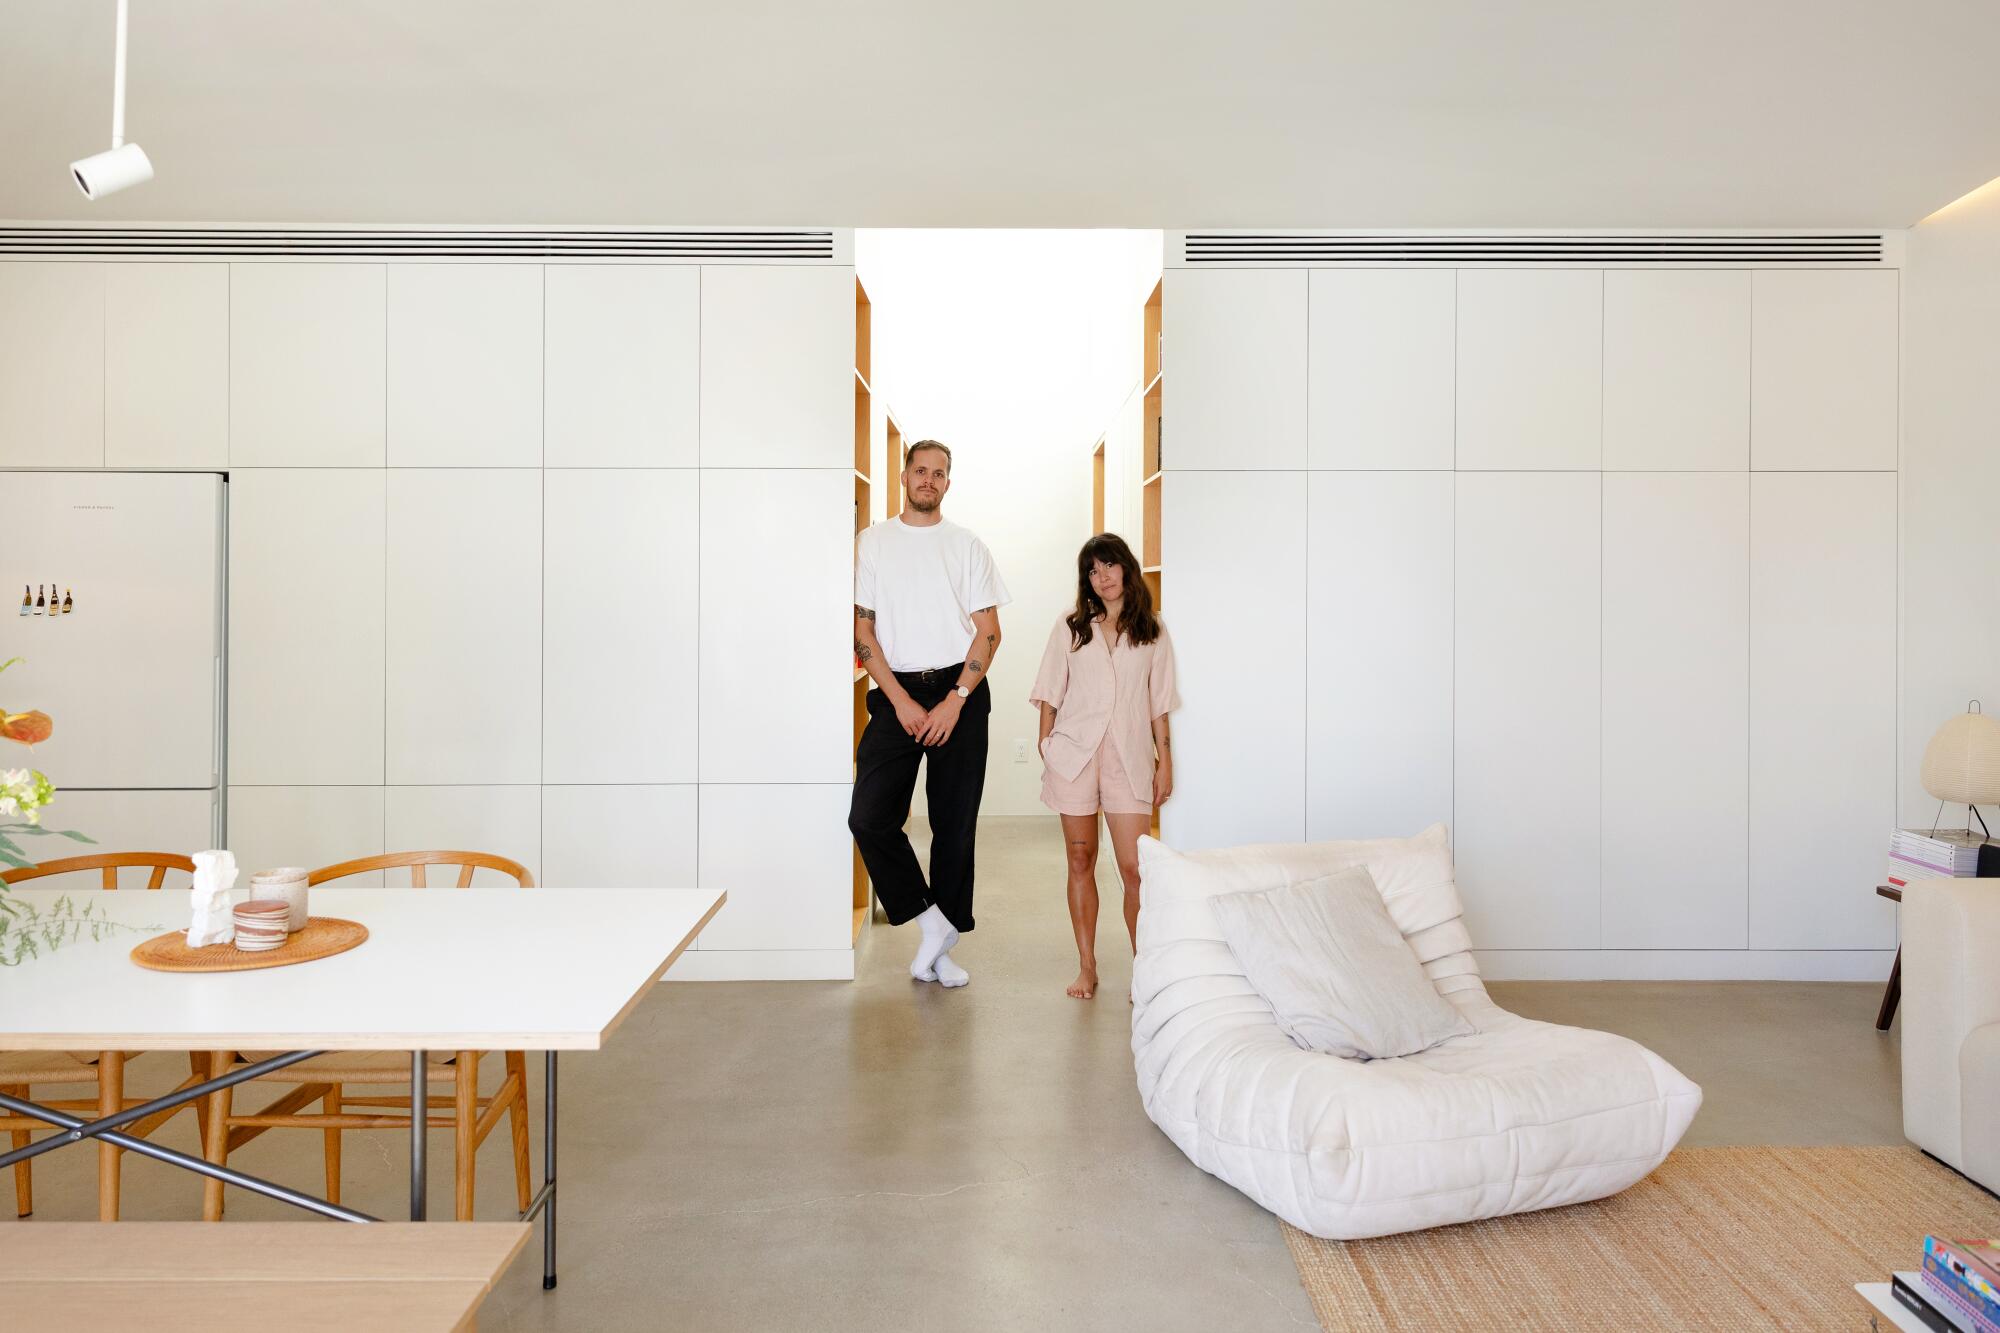 A man and a woman stand in an open-concept living area with white walls